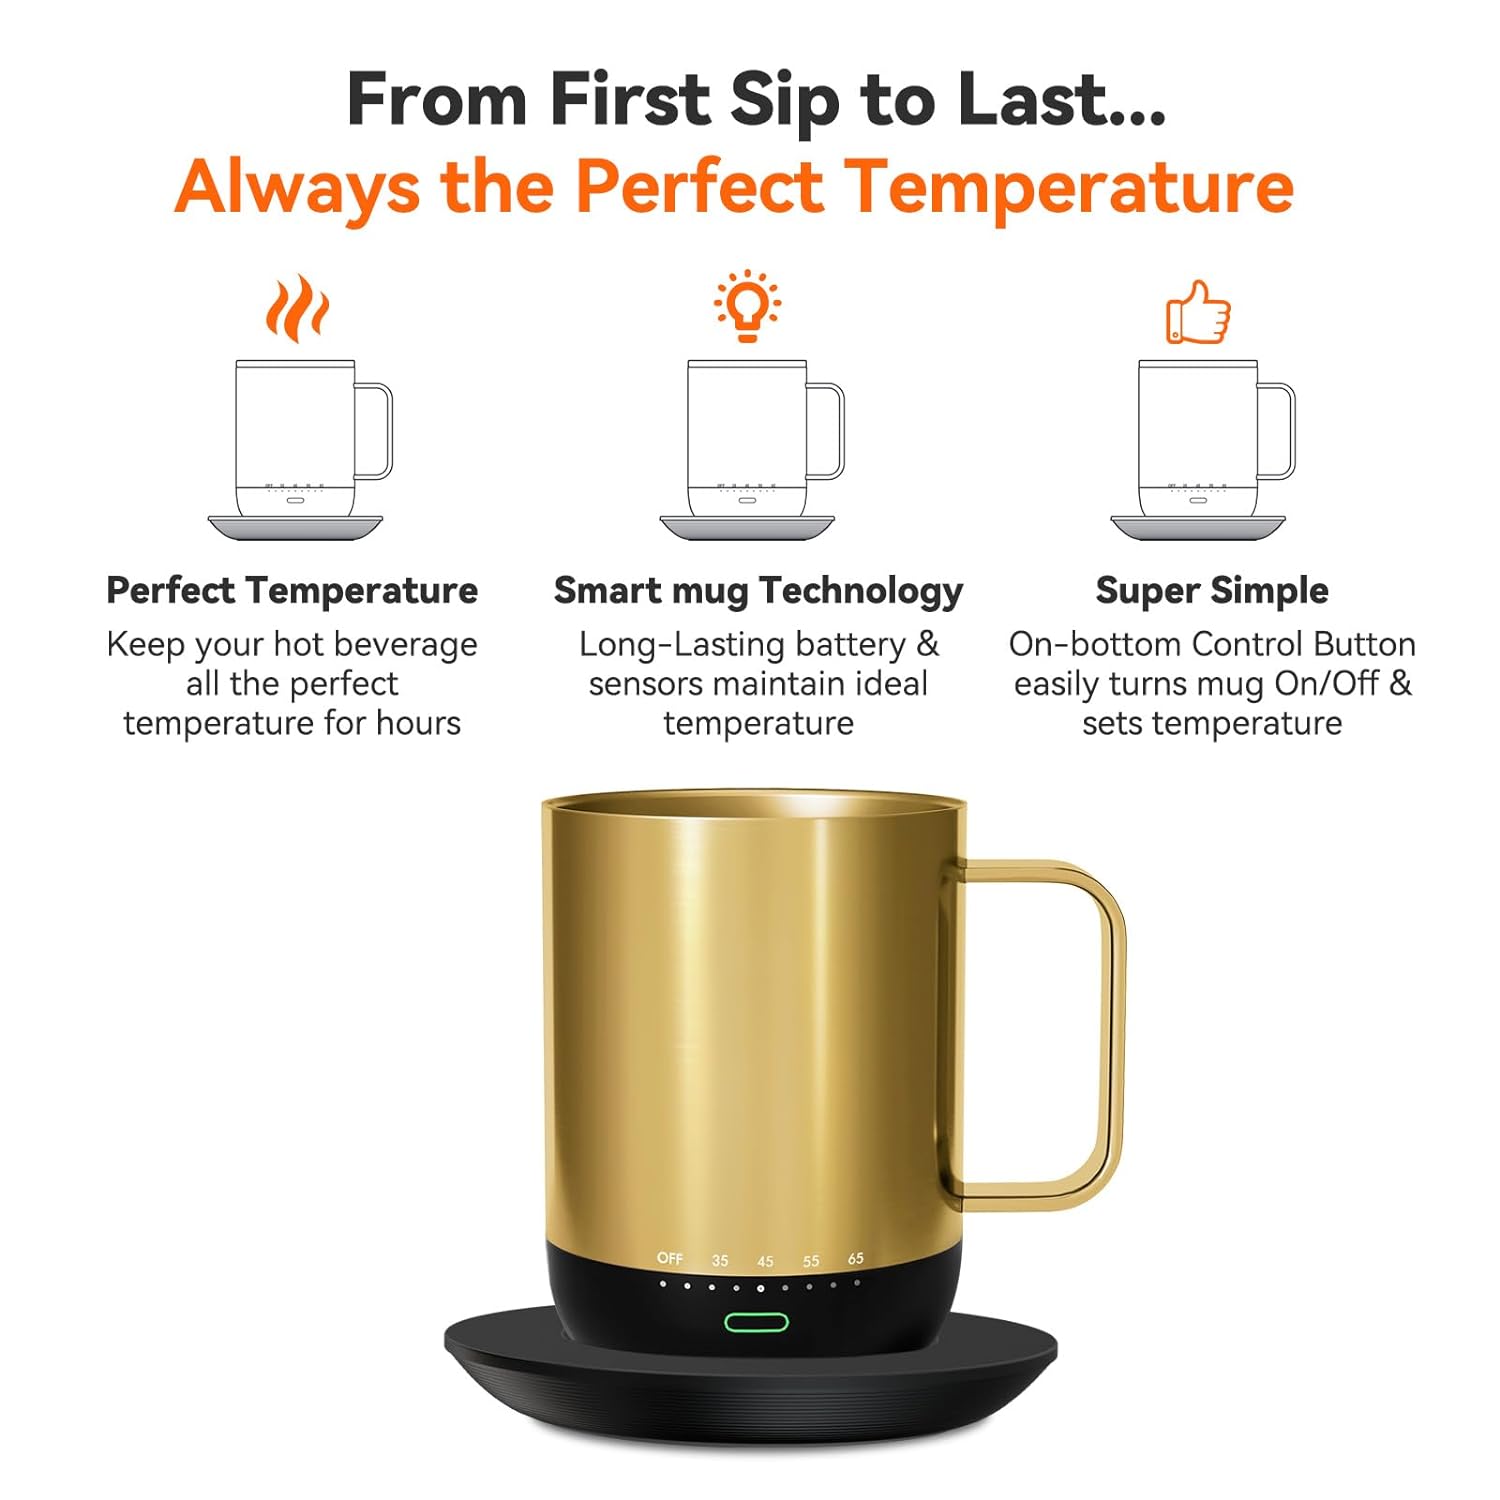 vsitoo S3pro Temperature Control Smart Mug 2 with Lid, Self Heating Coffee Mug 14 oz, 90 Min Battery Life - APP & Manual Controlled Heated Coffee Mug - Improved Design - Gifts for Coffee Lovers